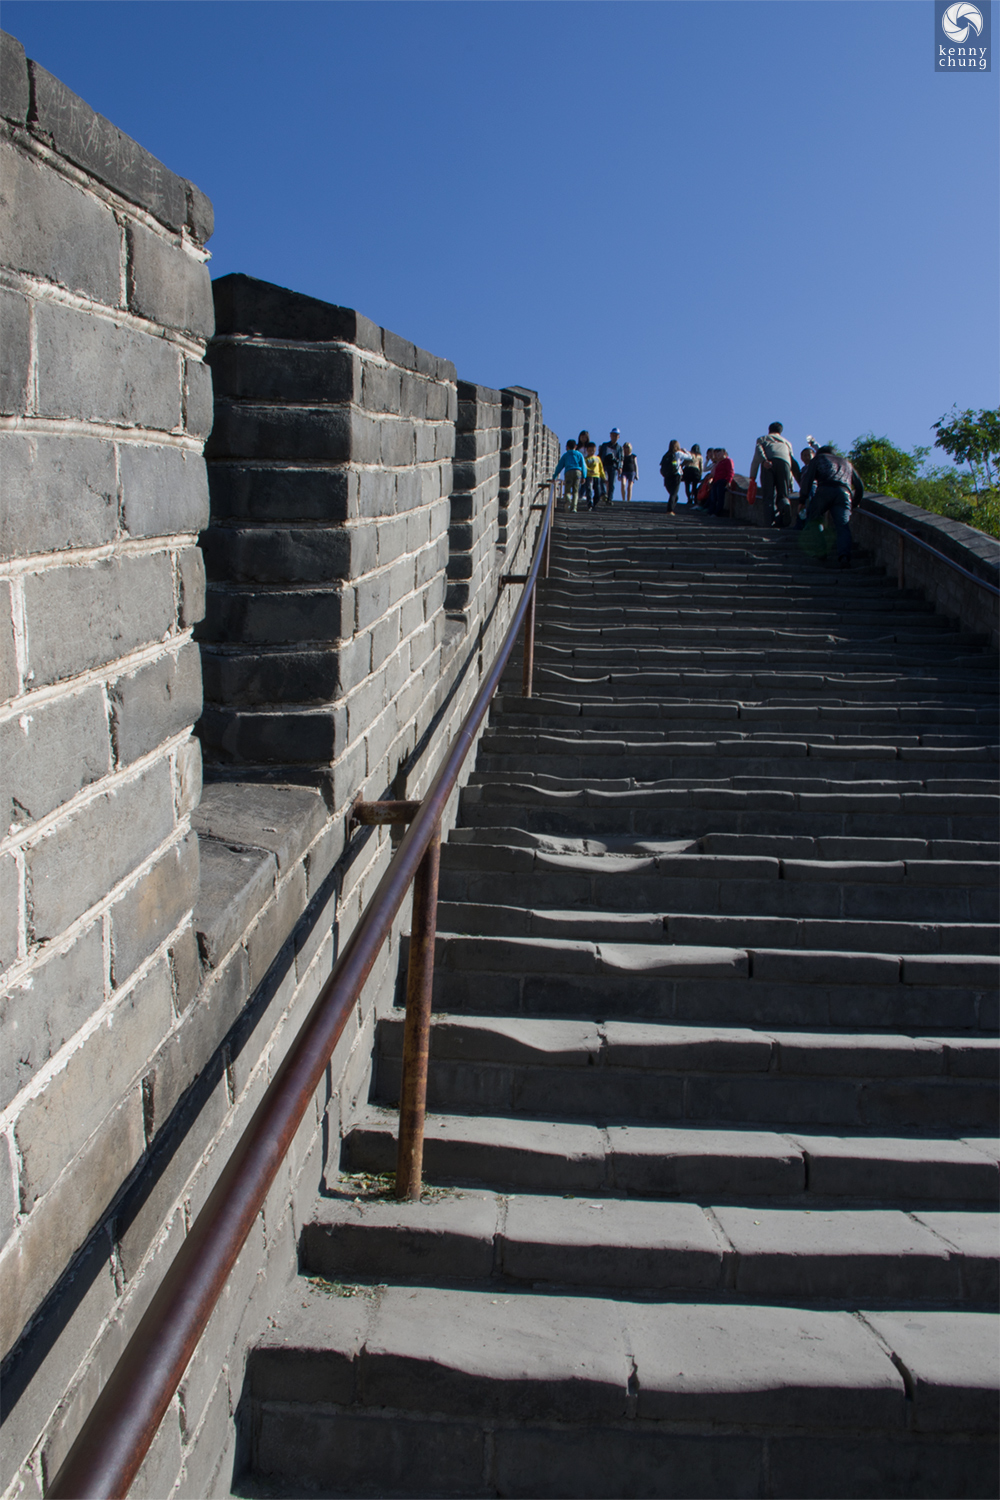 Even stairs at the Great Wall of China